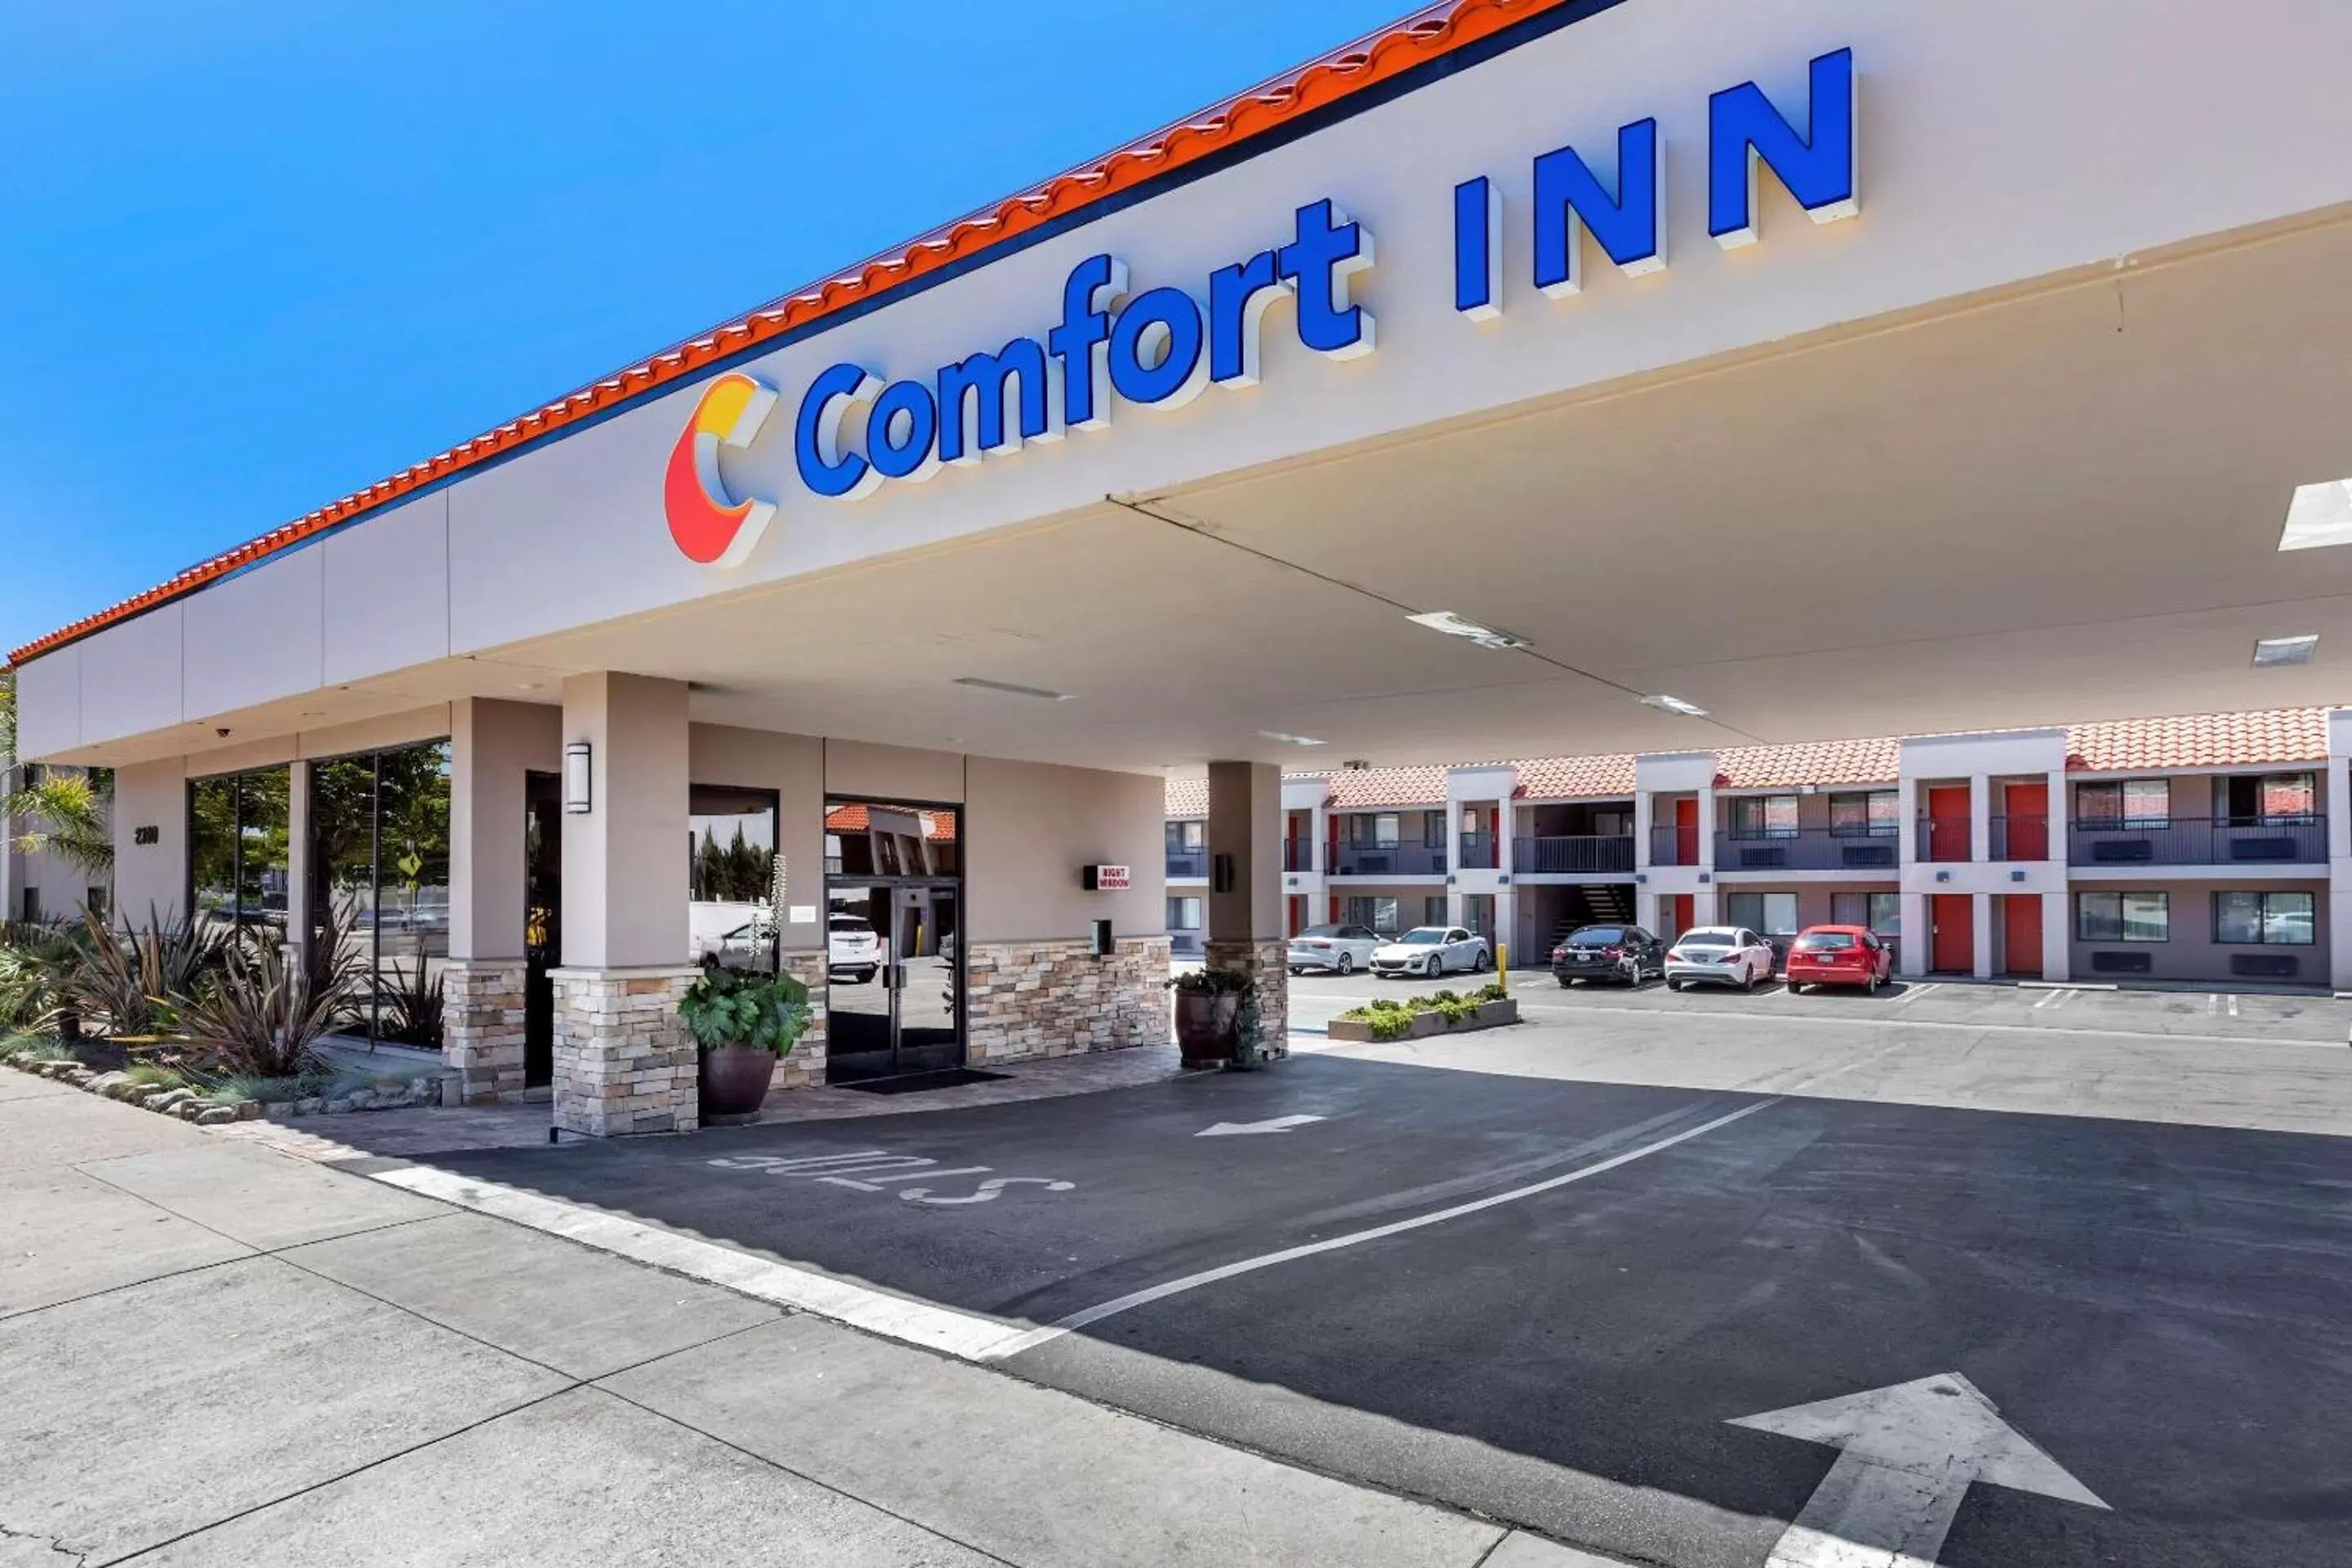 Property building in Comfort Inn Near Old Town Pasadena in Eagle Rock